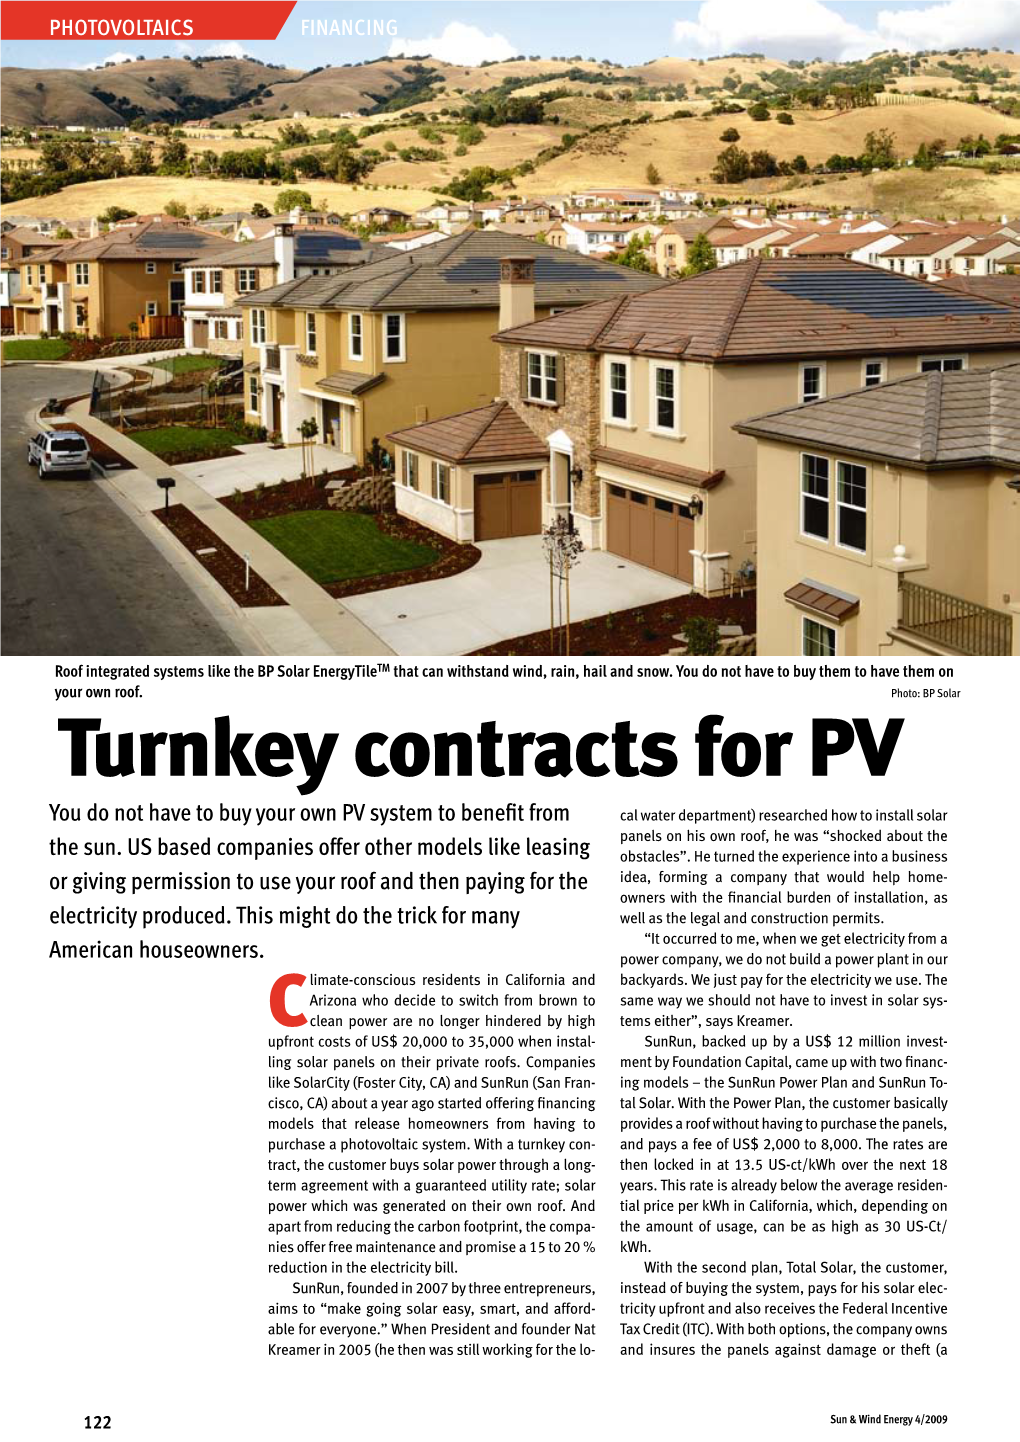 Turnkey Contracts for PV